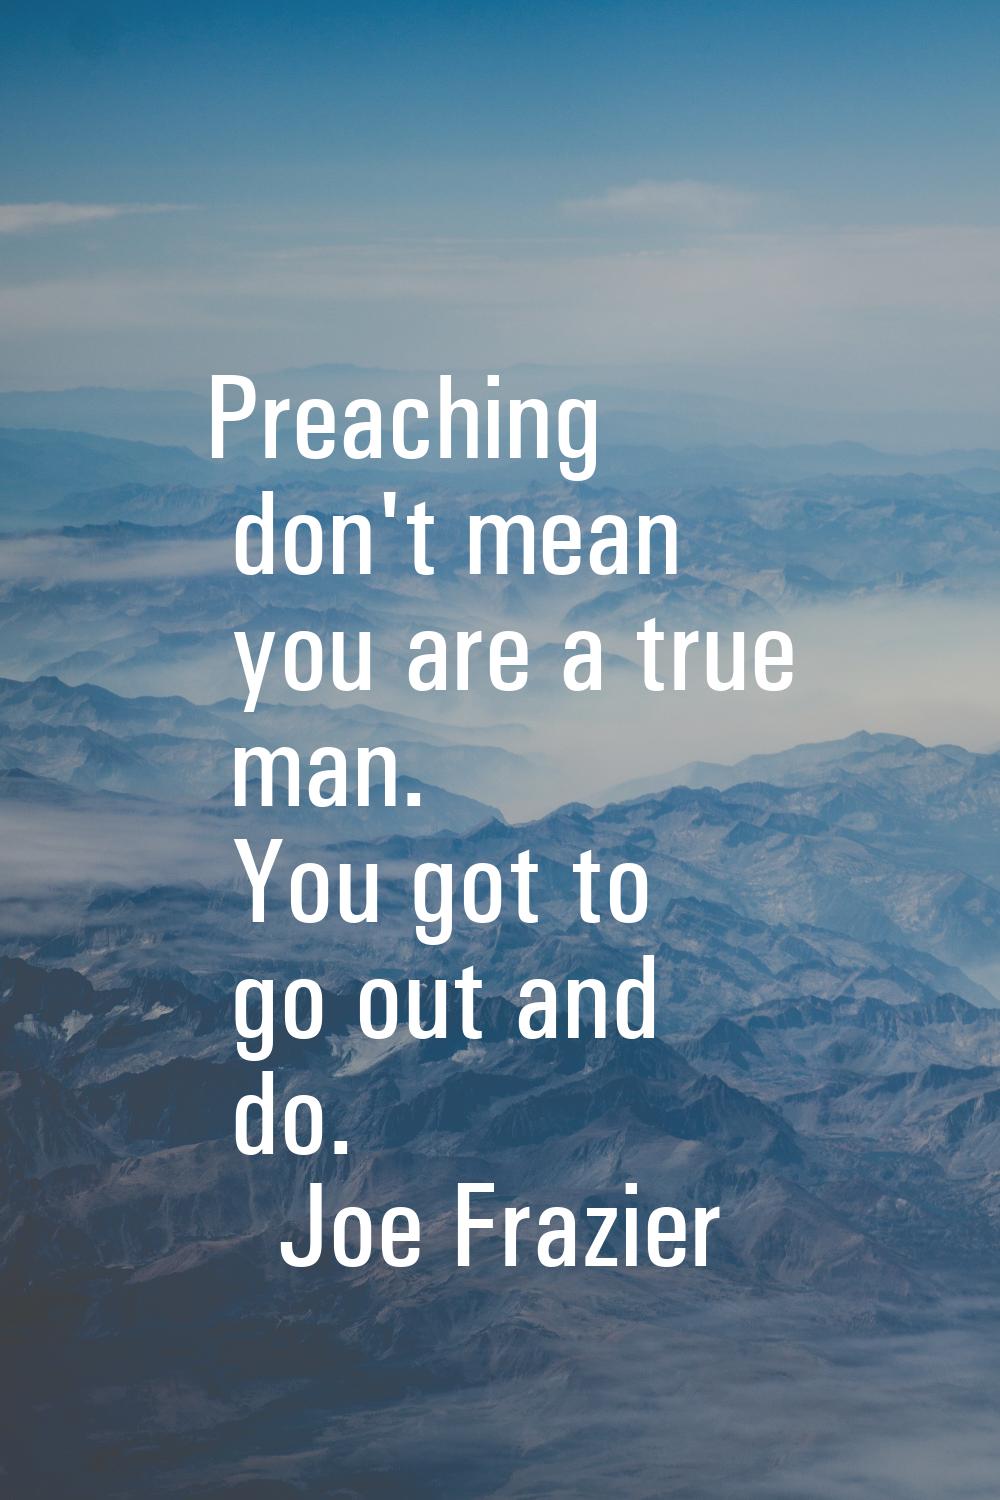 Preaching don't mean you are a true man. You got to go out and do.